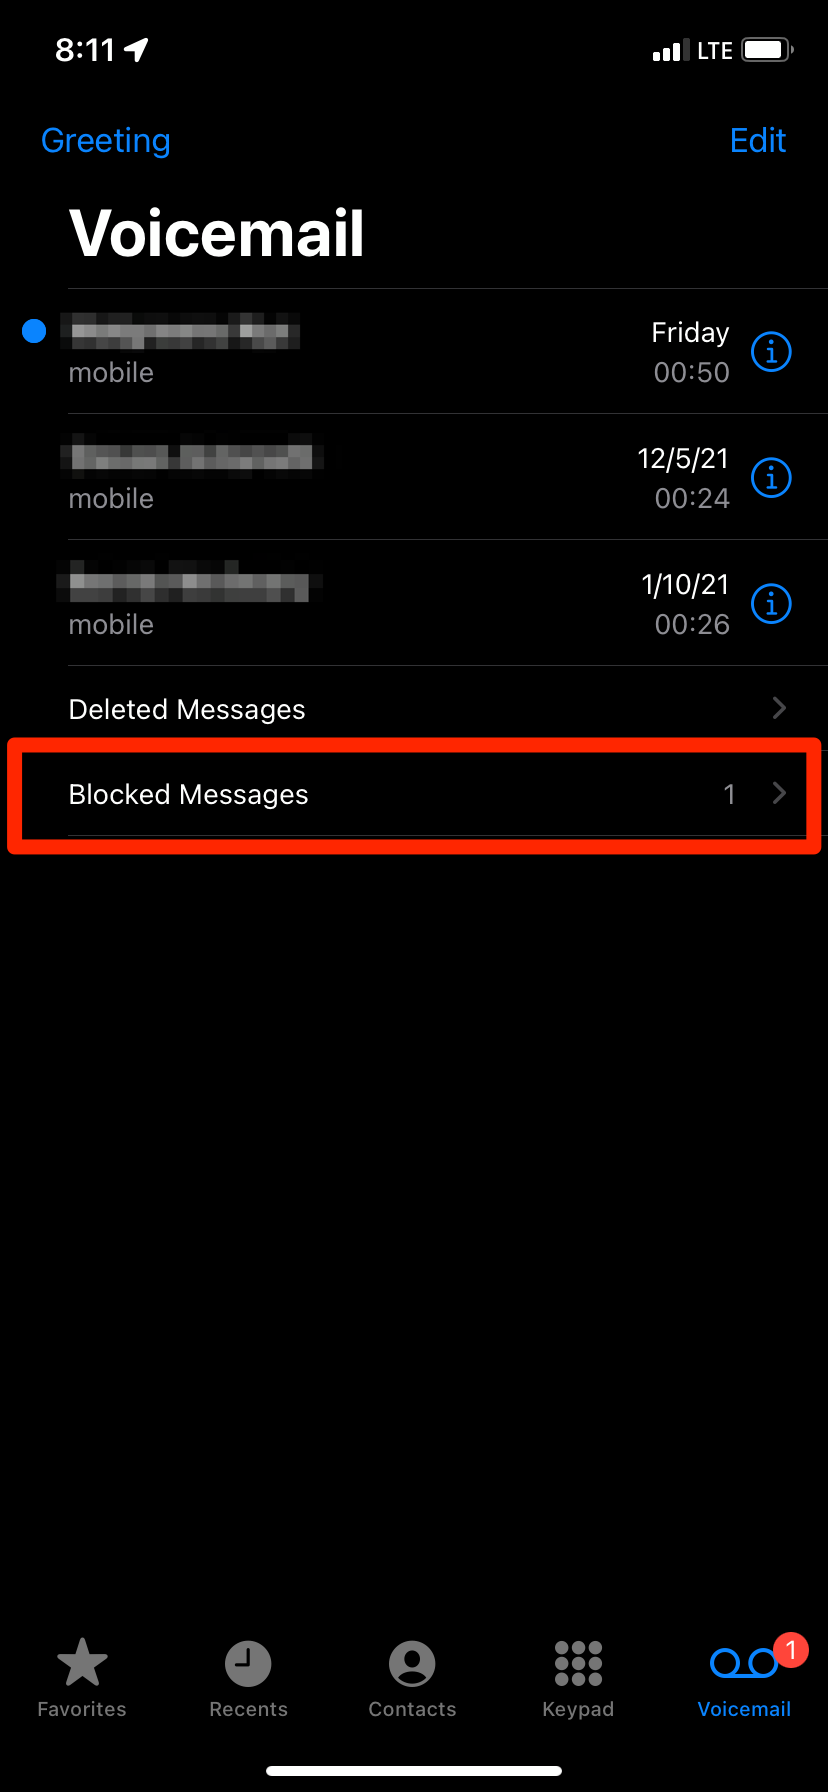 The Voicemails menu on an iPhone. The Blocked Messages option is highlighted.